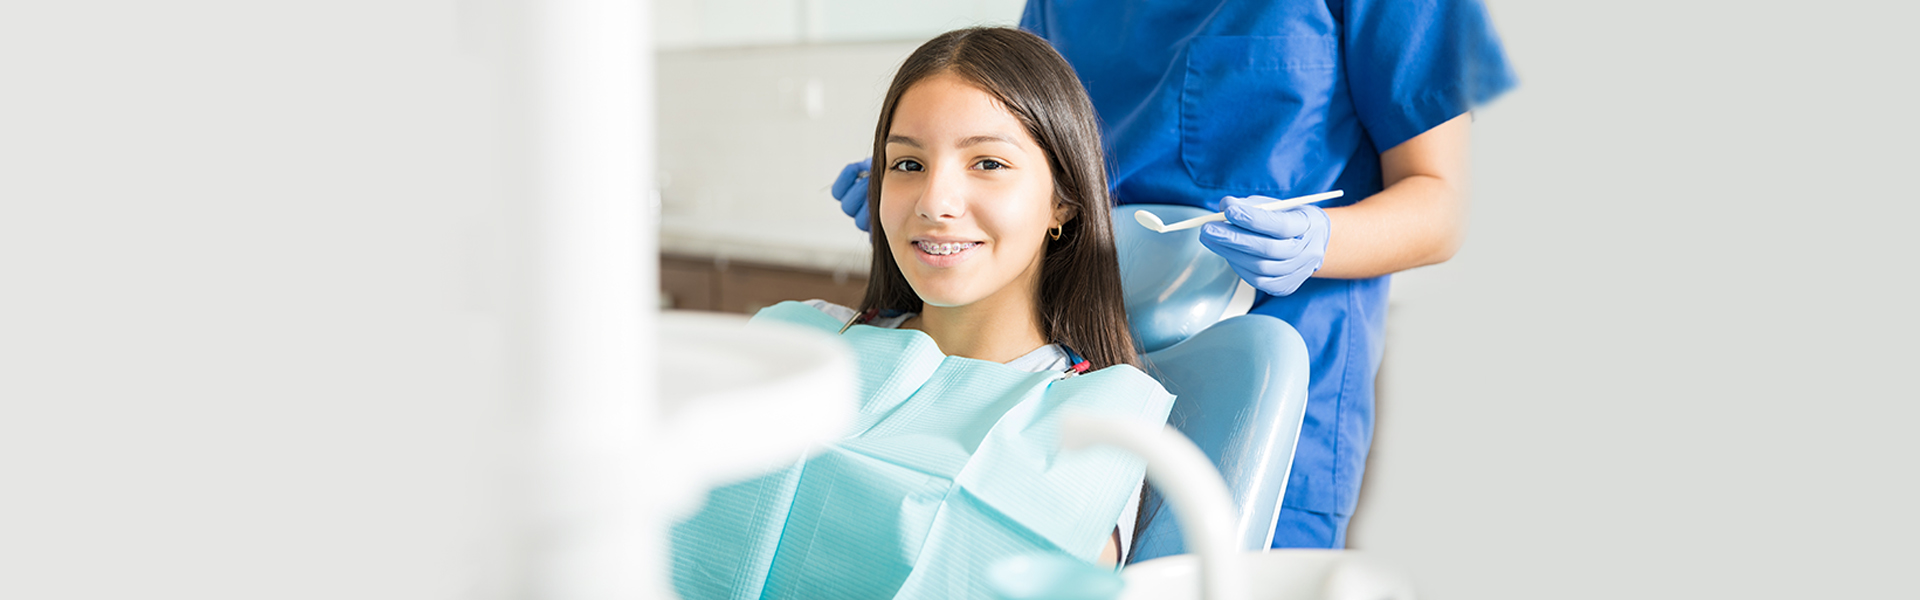 4 Vital Things You Need to Know About Orthodontic Treatment